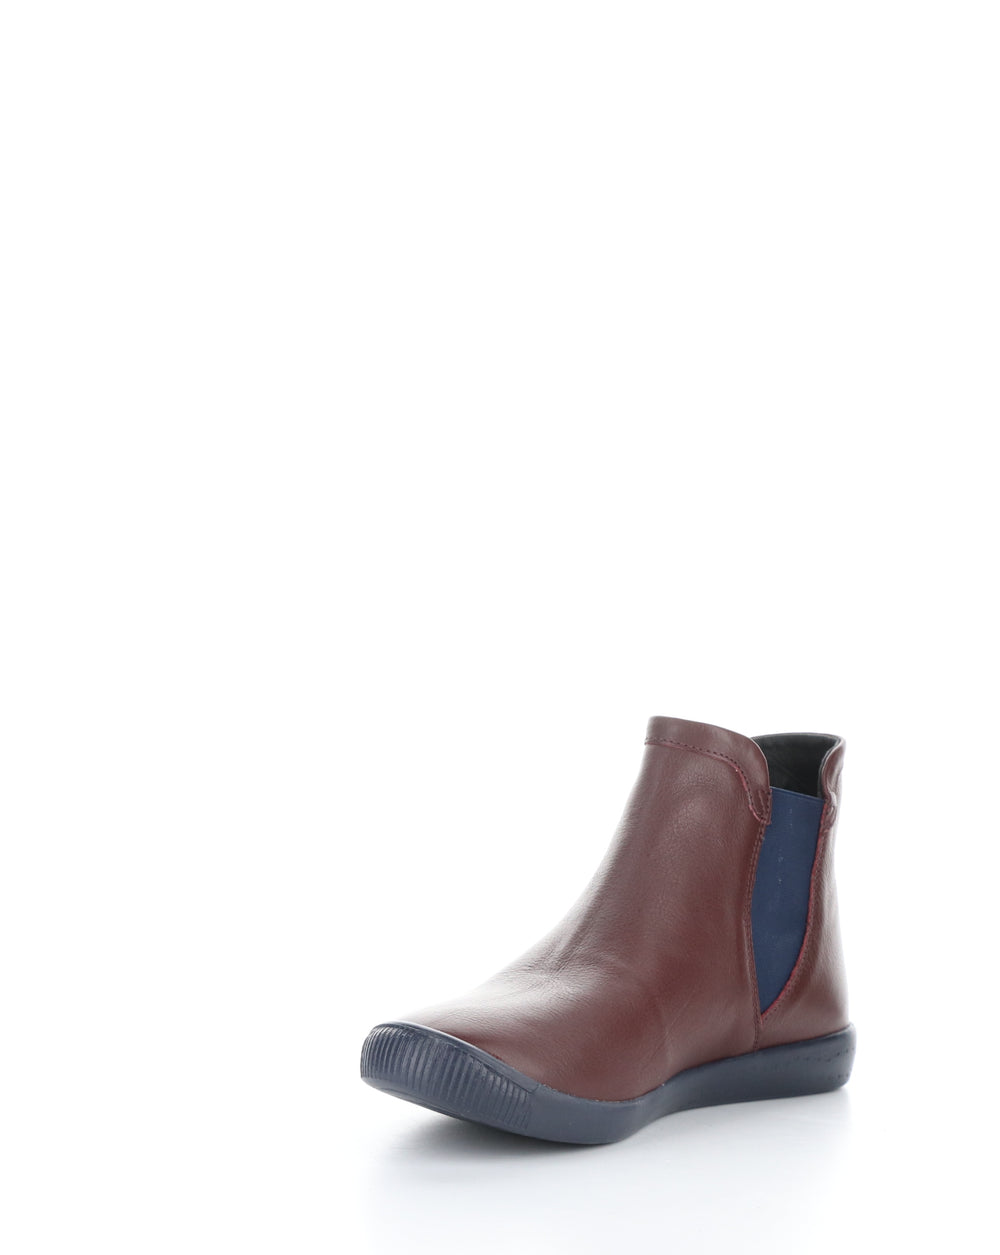 ITZI650SOF 013 DK RED/NAVY Elasticated Boots